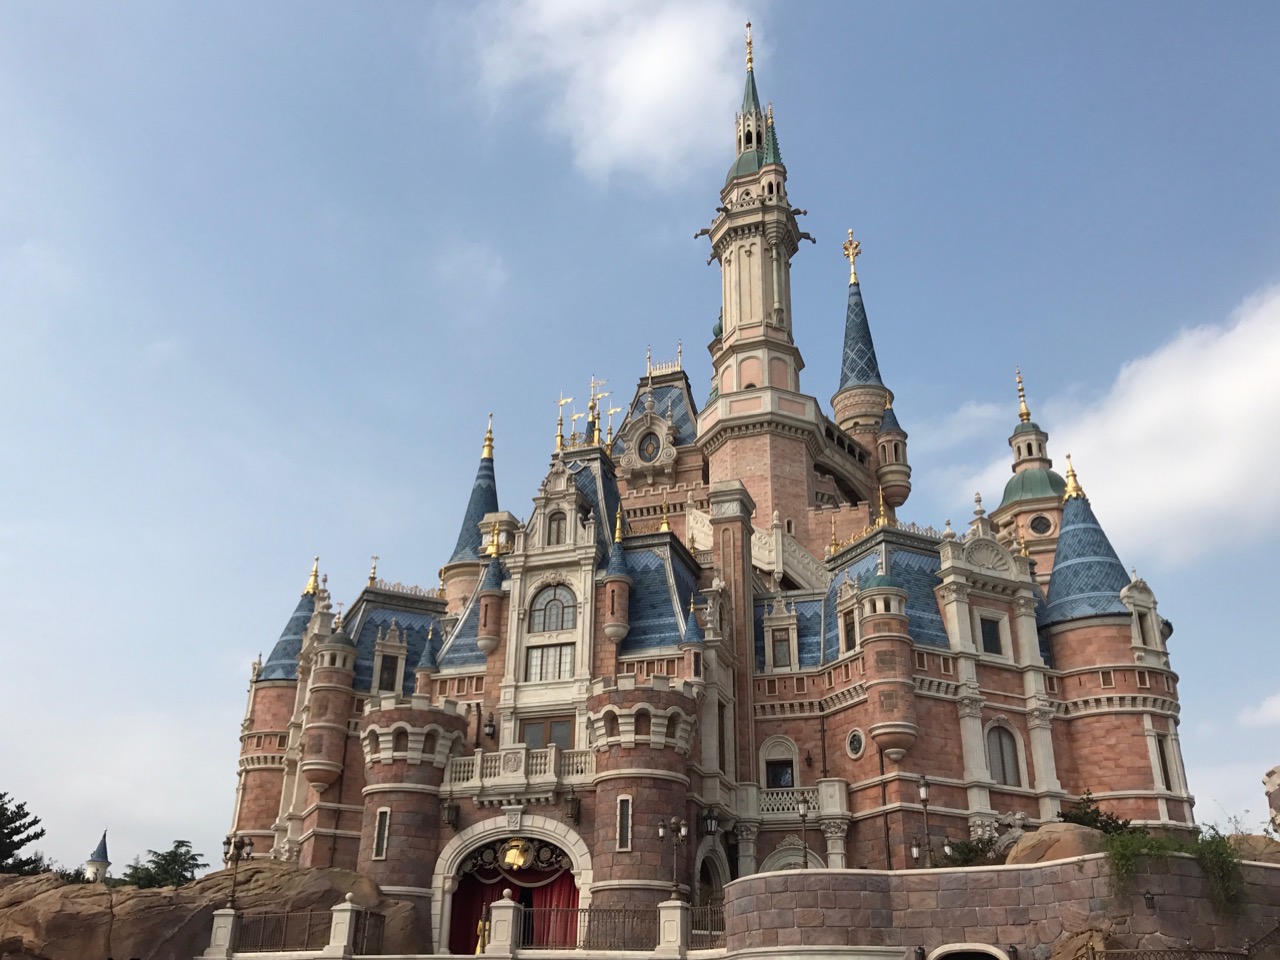 Cool Things About the Different Disney World Castles Around the World